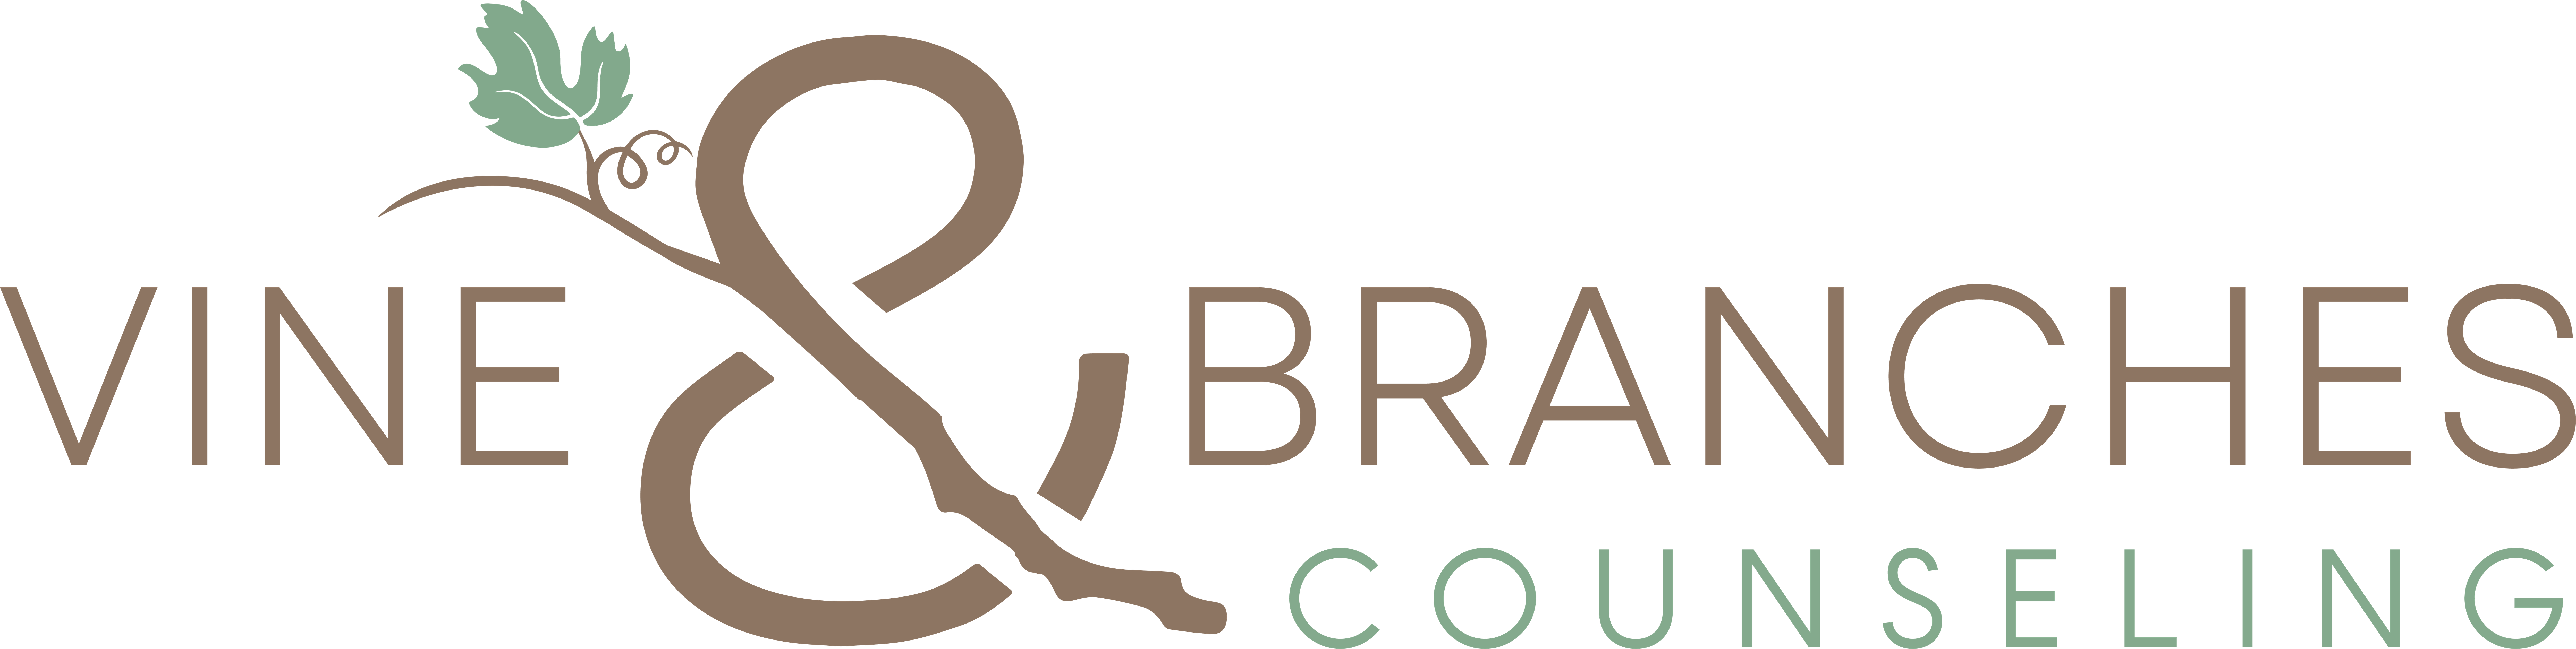 Vine & Branches Counseling